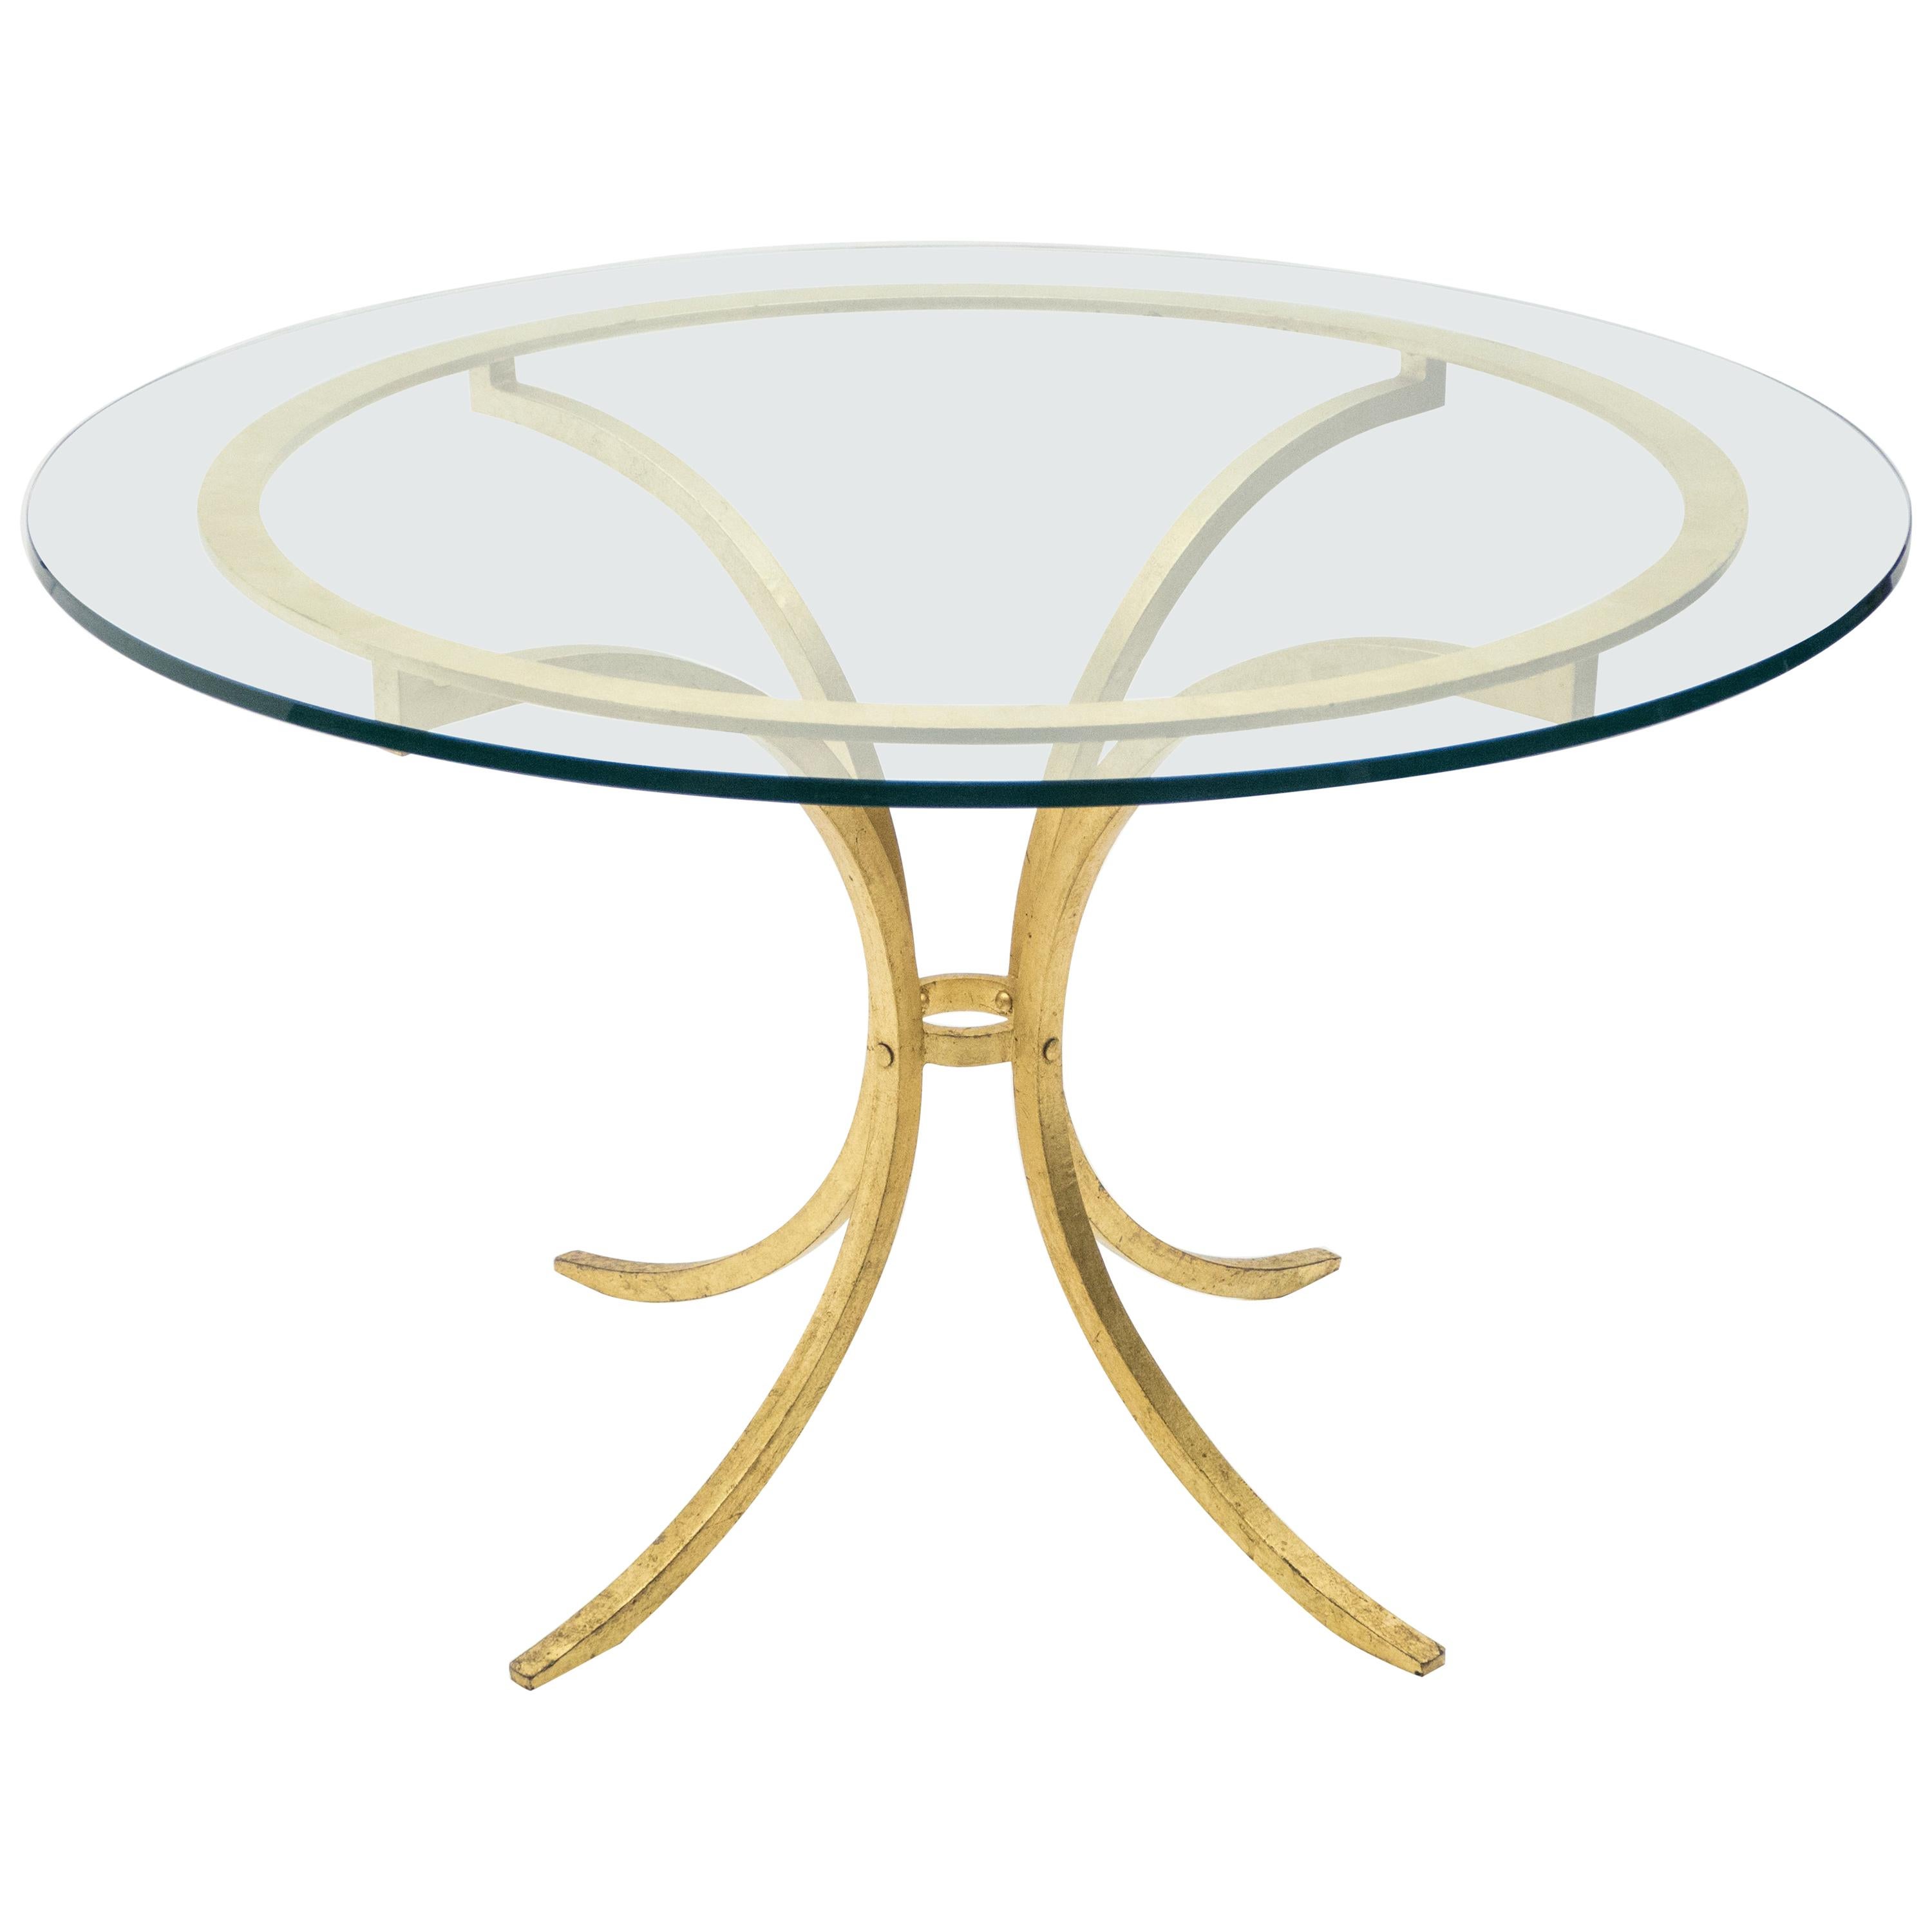 French Midcentury Roger Thibier Gilt Wrought Iron Gold Leaf Glass Dining Table